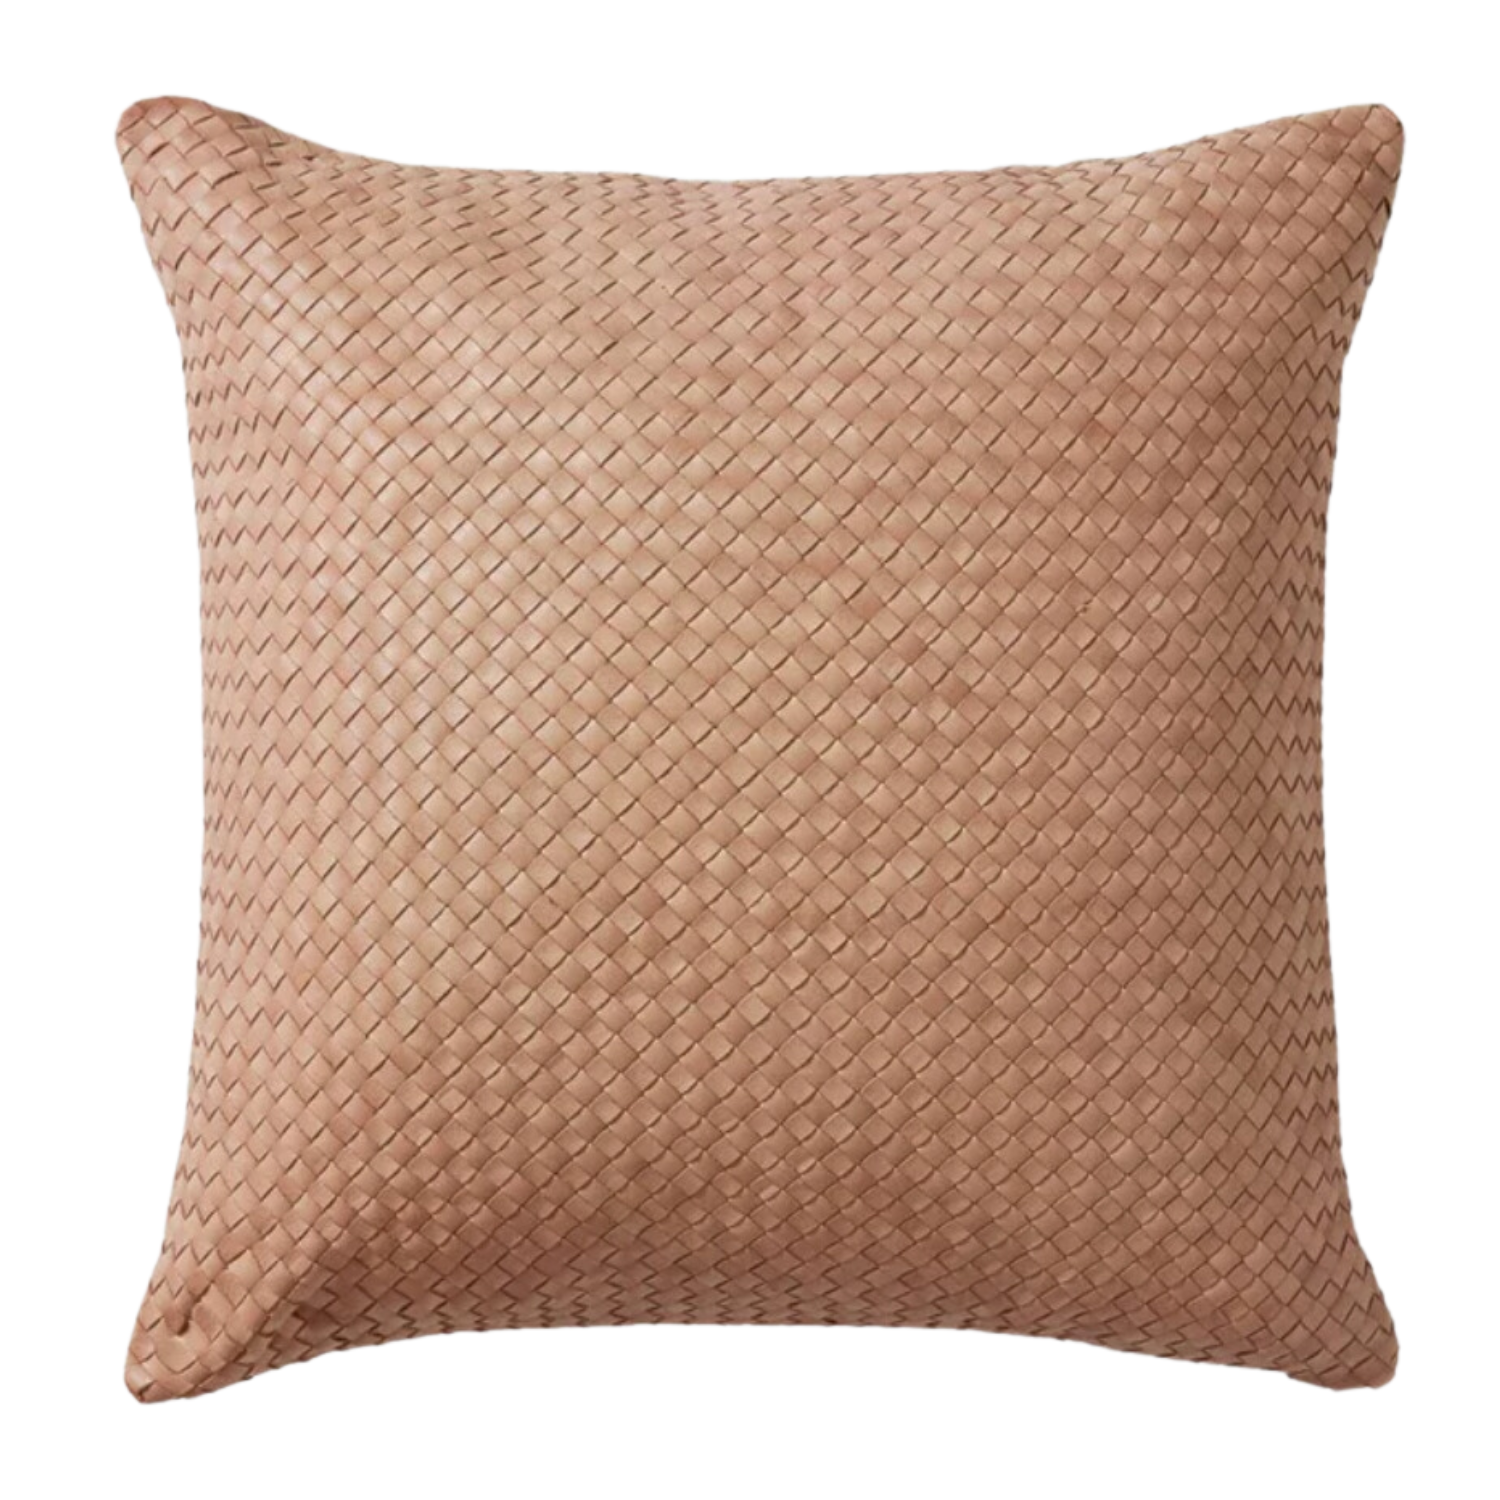 Dhara Leather Pillow